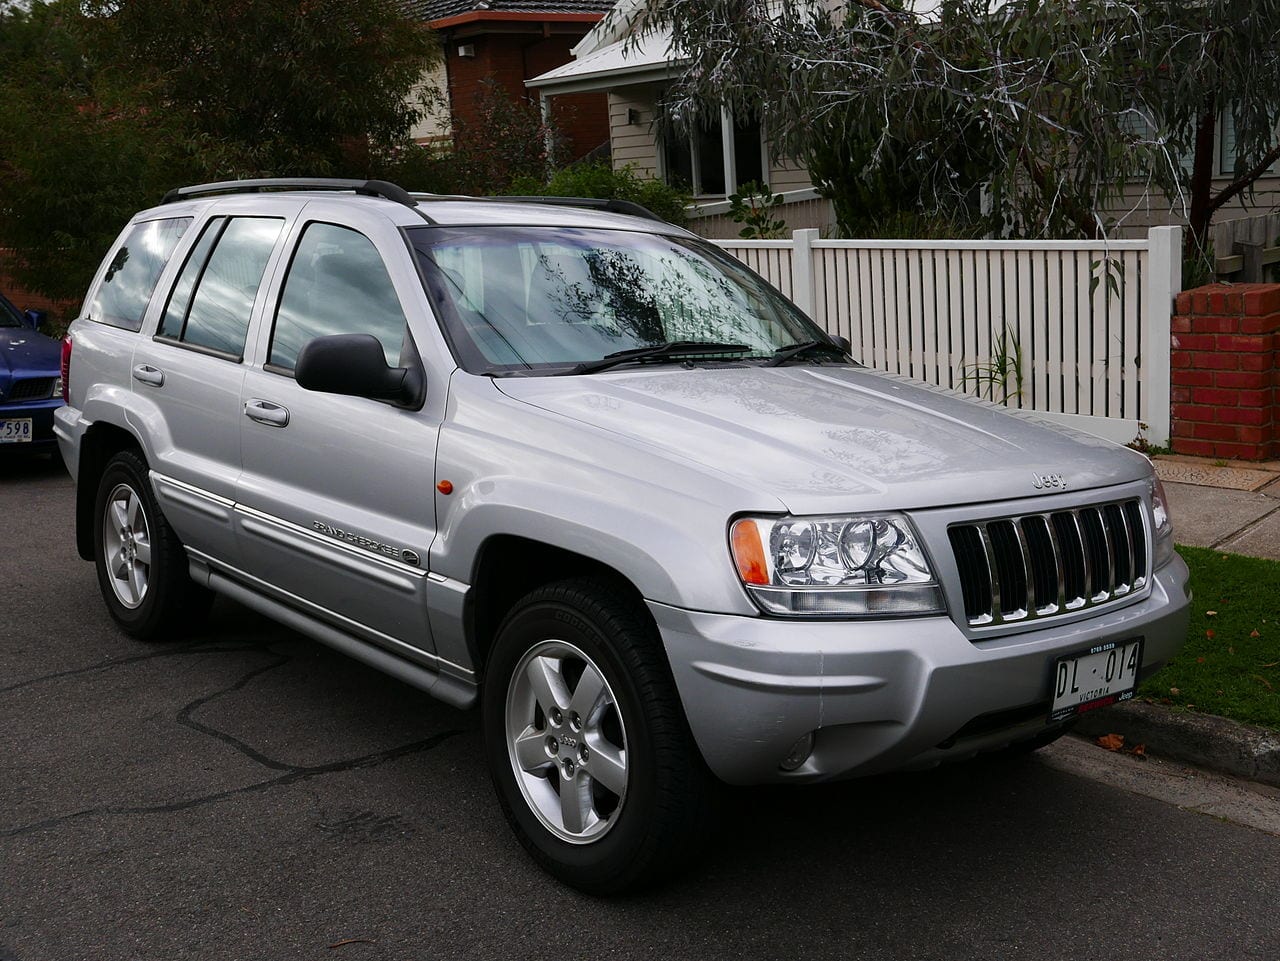 Which Generation of the Jeep Grand Cherokee Should I Opt